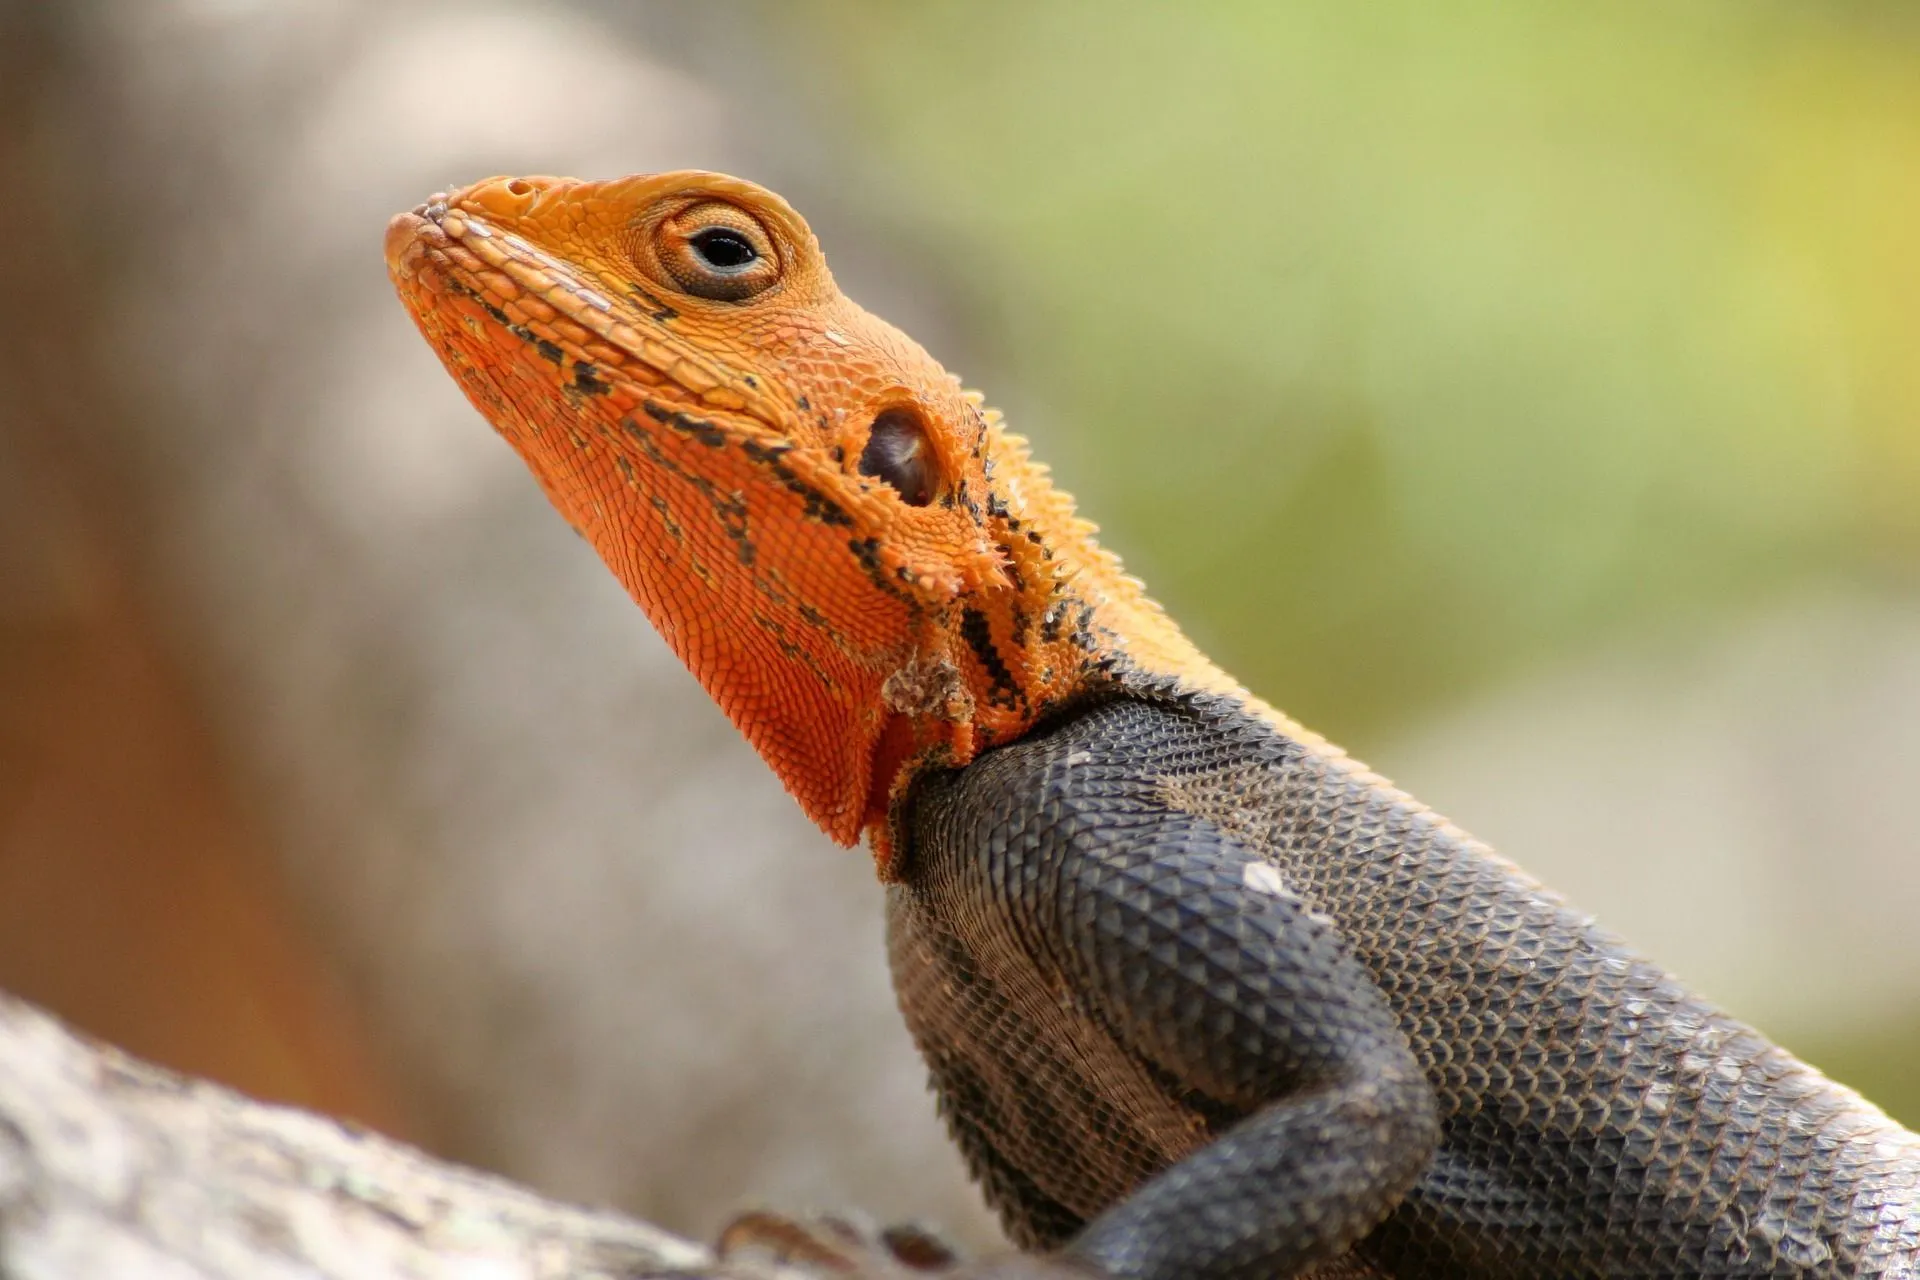 Lizards are one of the most successful species in the animal kingdom to evolve into different forms and occupy diverse regions around the world.